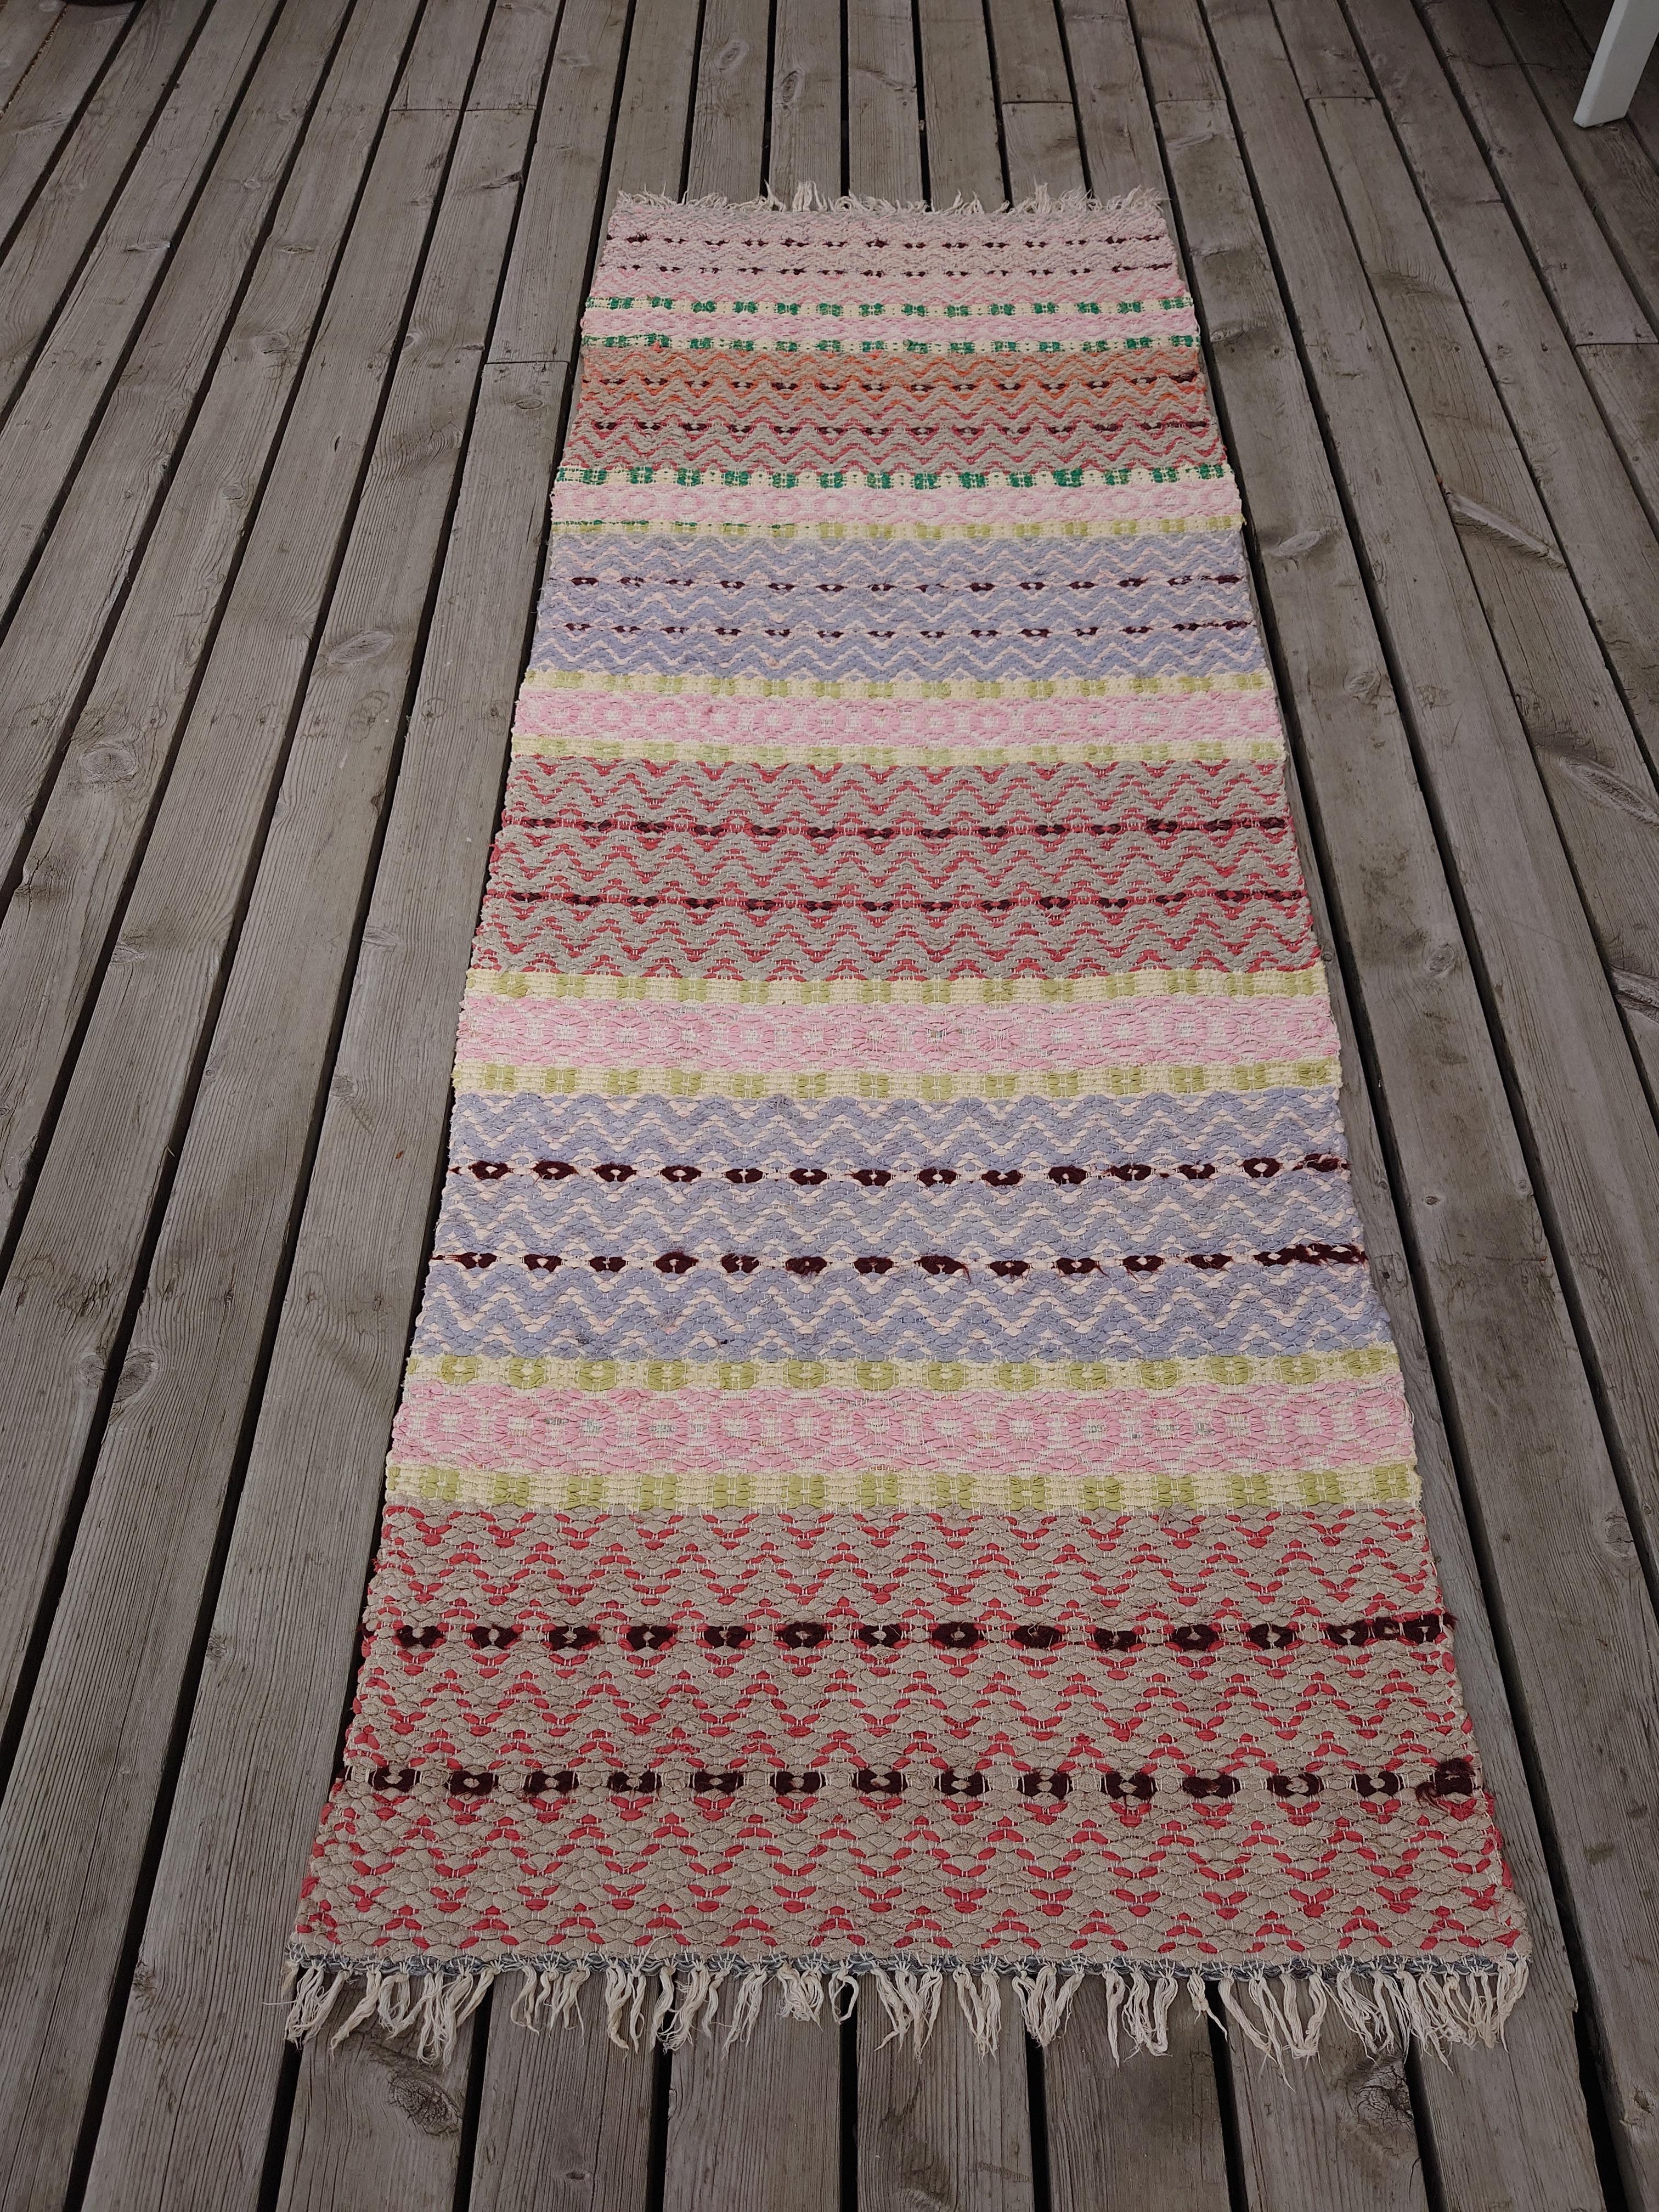 Swedish Rag Rug Hand Woven Pastel Color In Good Condition For Sale In Boden, SE